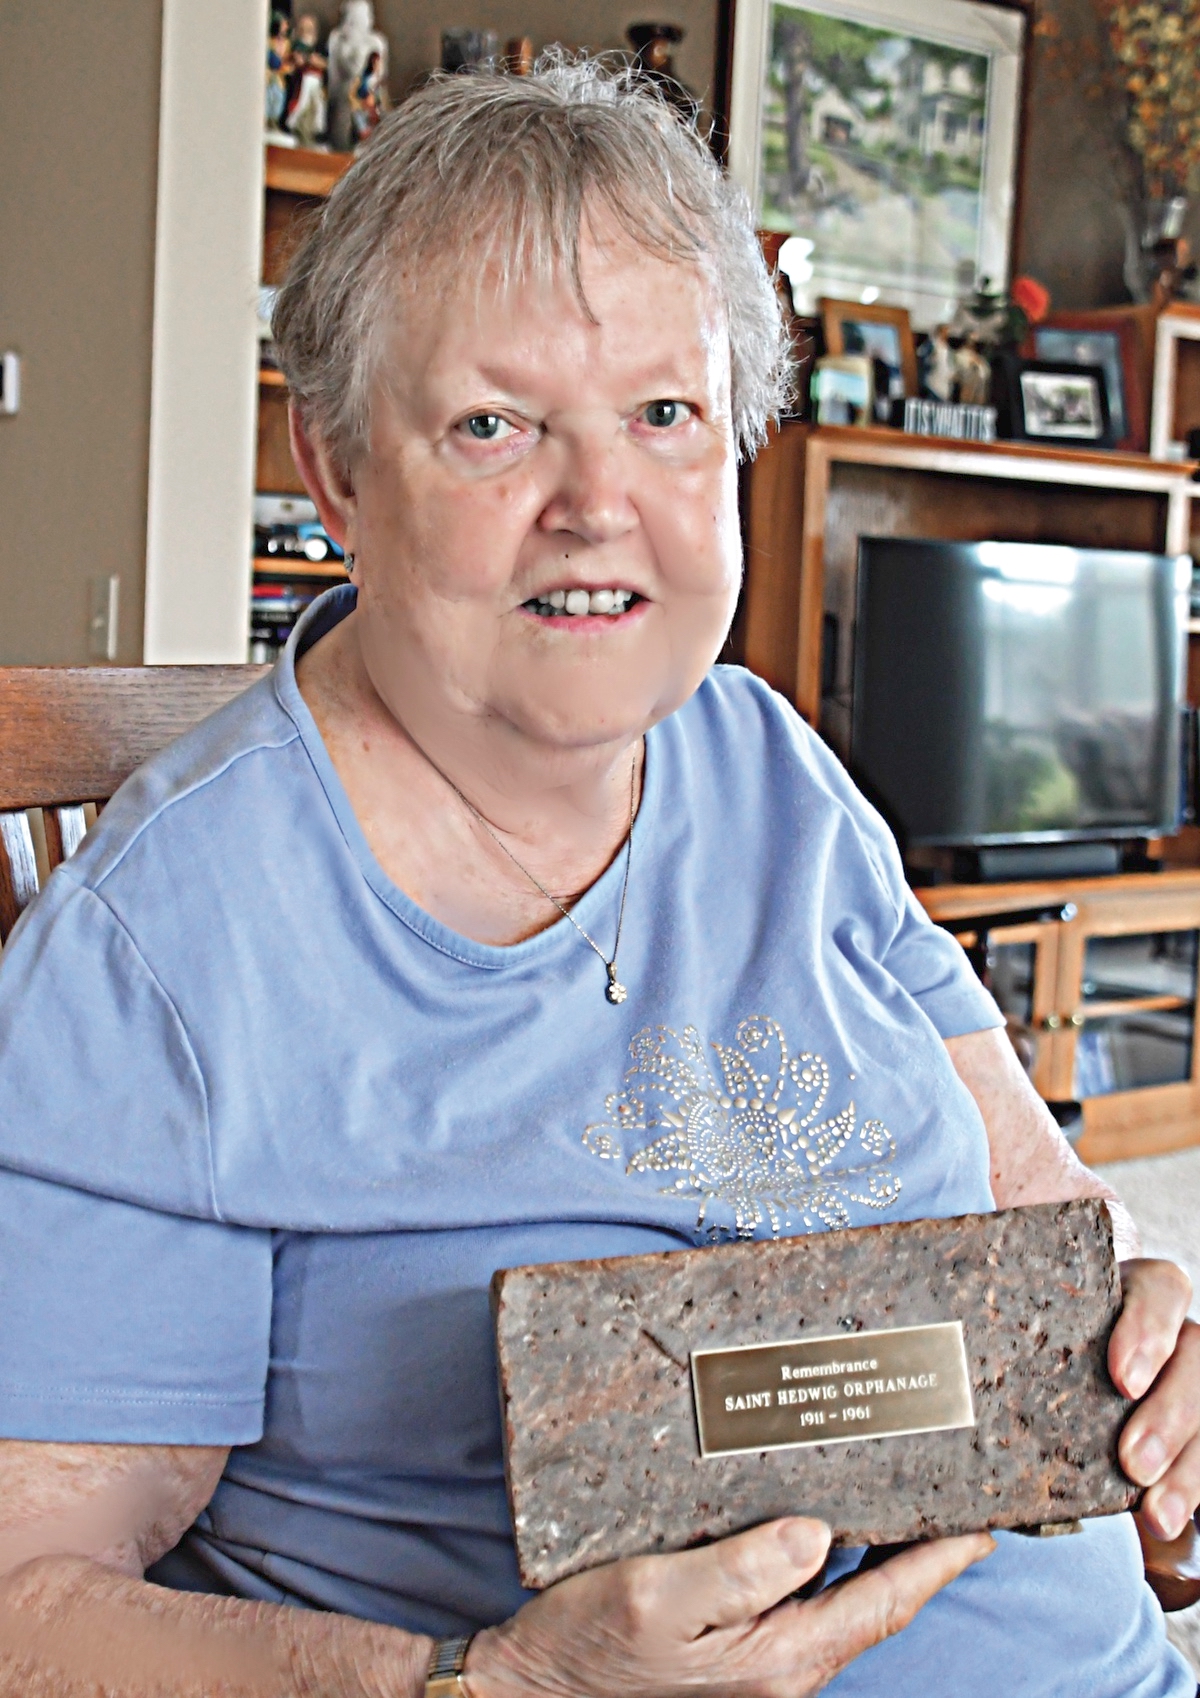 Sun City resident Joanie Berg was once known as Boney Bones to the other kids at St. Hedwig orphanage, where she lived for ten years from 1943 to 1953. Here she holds a brick from St. Hedwig. (Photo by Christine Such/My Sun Day News)